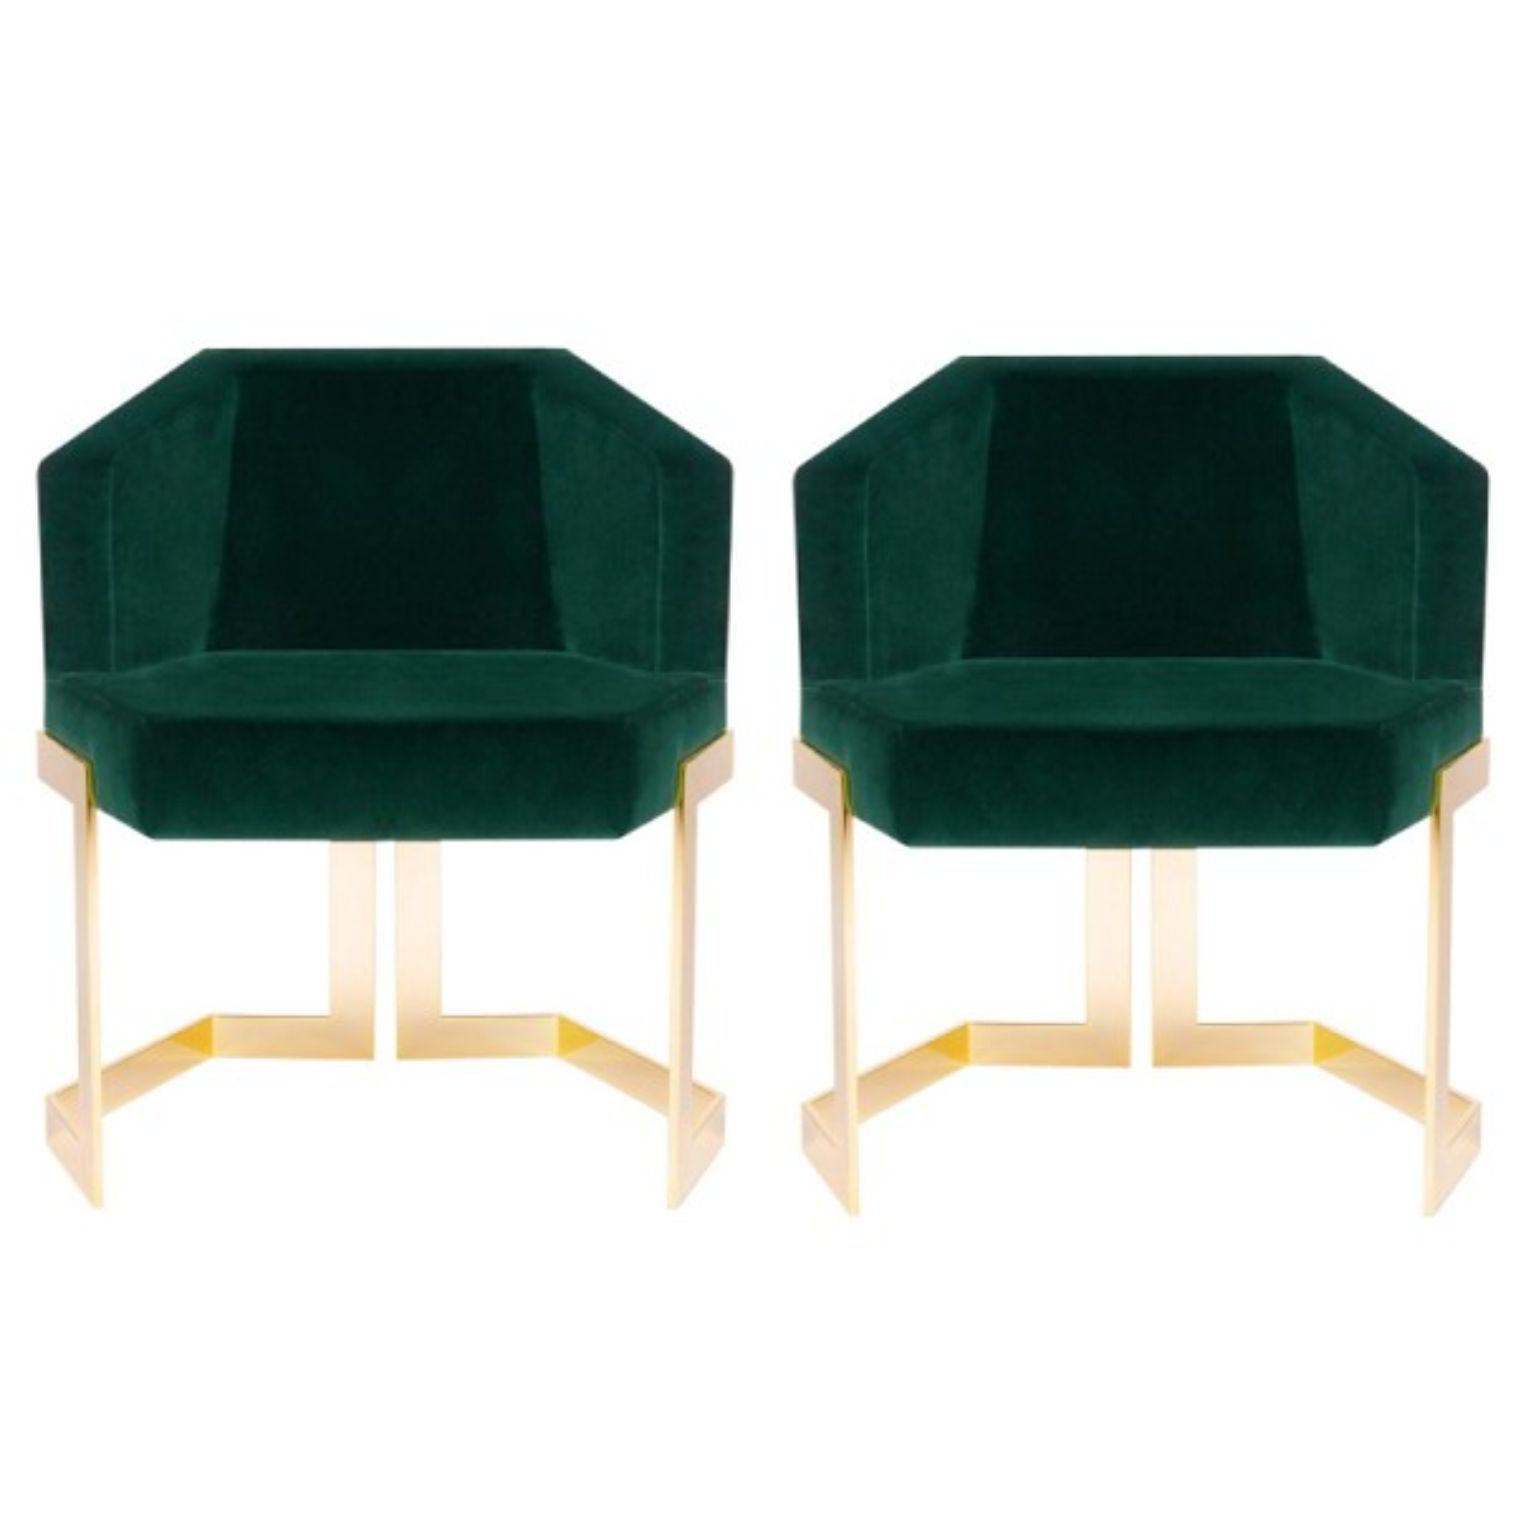 Set of 2 the hive dining chairs, Royal Stranger
Dimensions: 65.5 x 55 x 79 cm
Materials: Velvet. Legs polished brass.


A chair with an extremely luxurious vision. The Hive chair, as the name implies, is strong and robust in nature, its